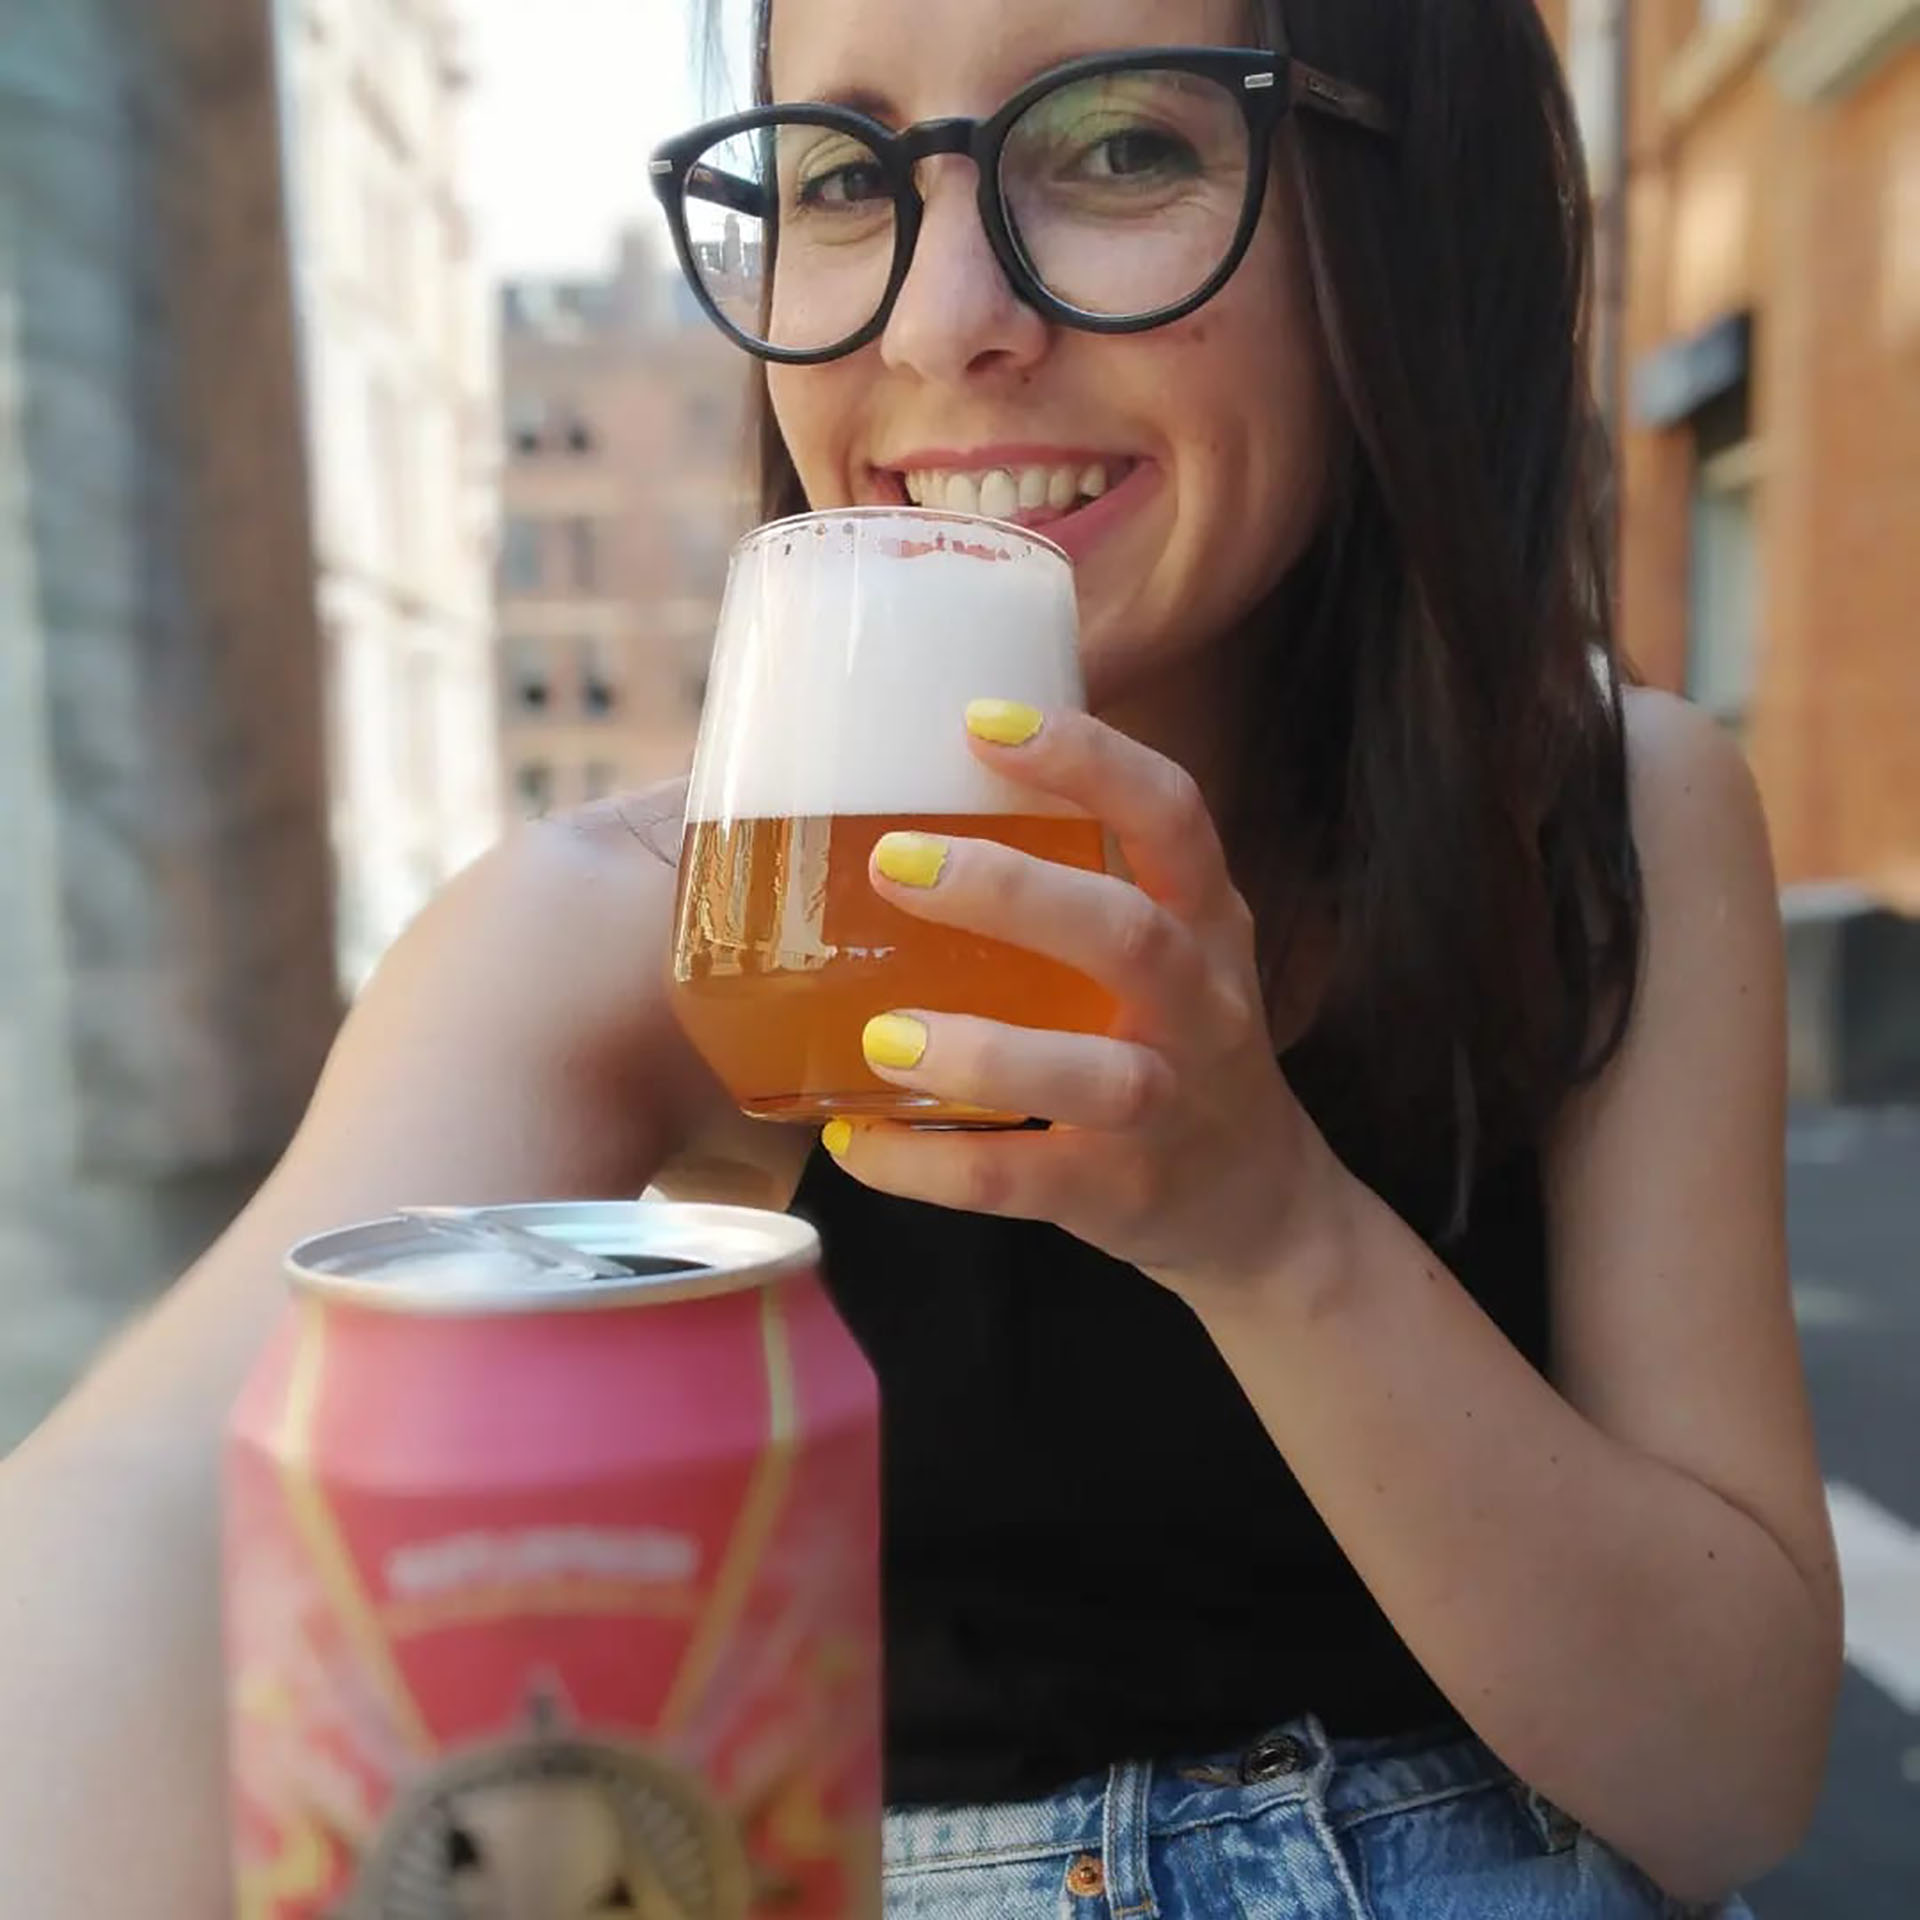 Eña is currently a member of a consulting firm where she works as a beer sommelier